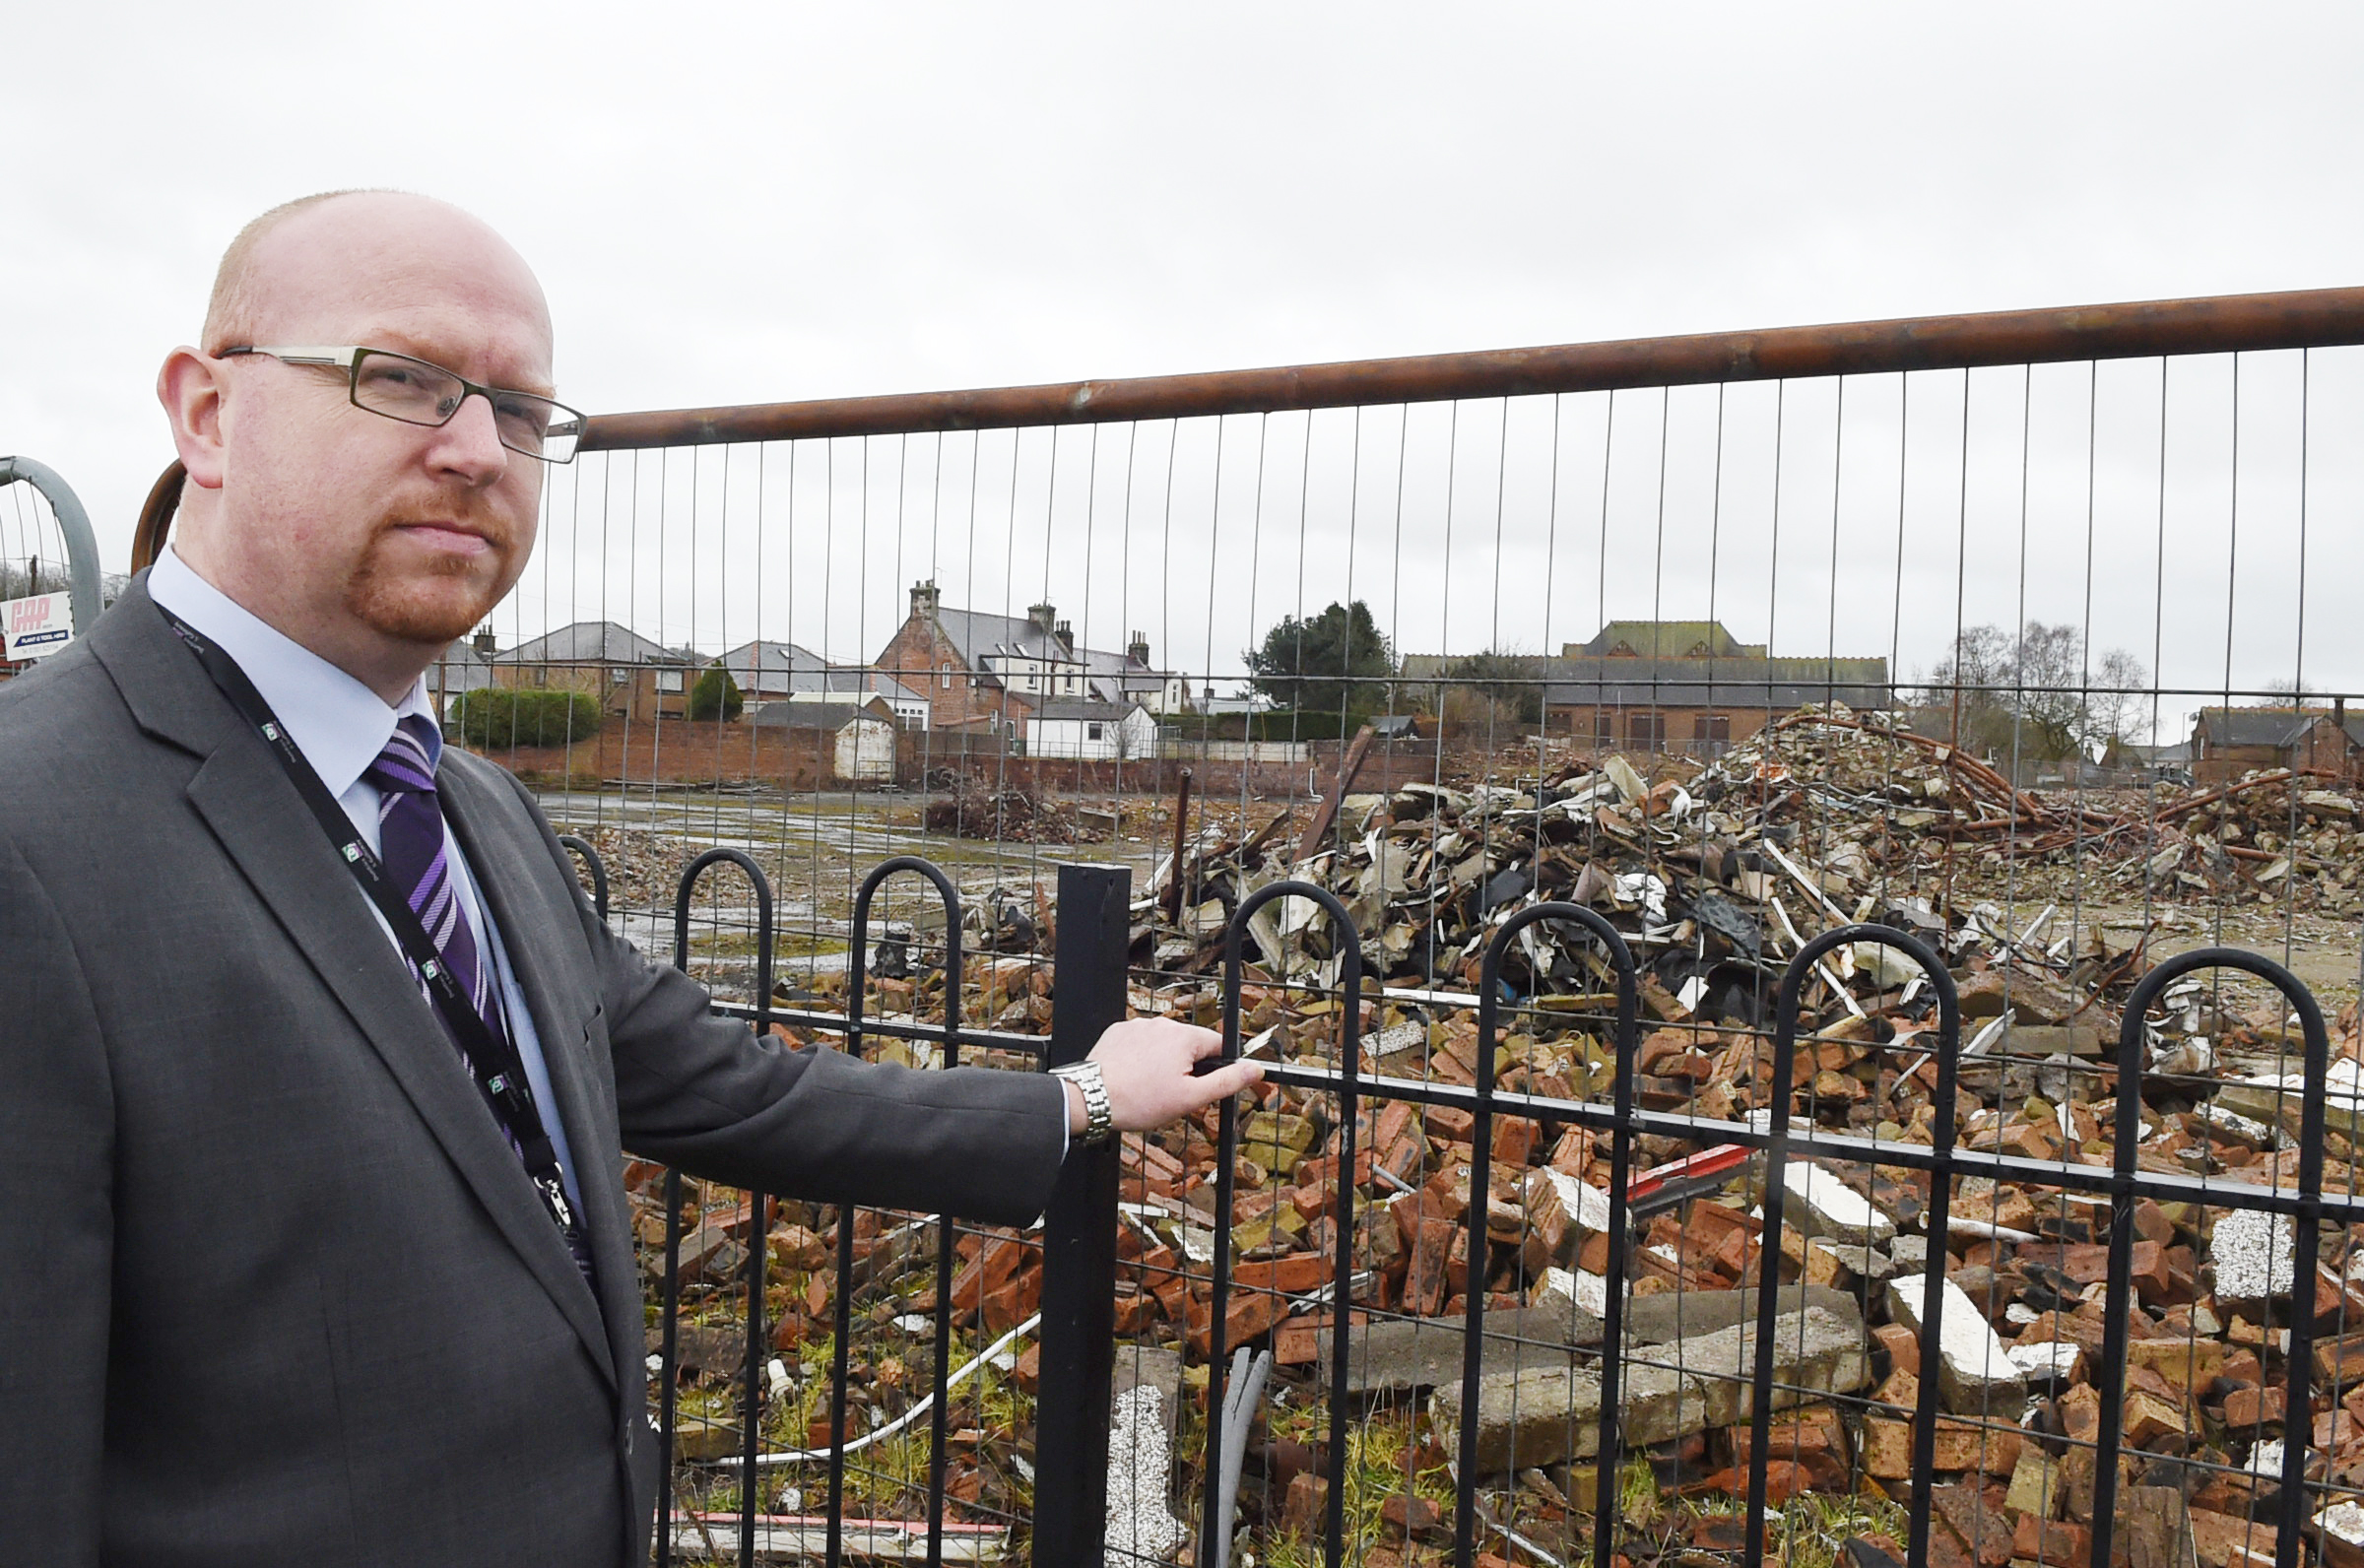 'Eyesore' rubble on the move from school site